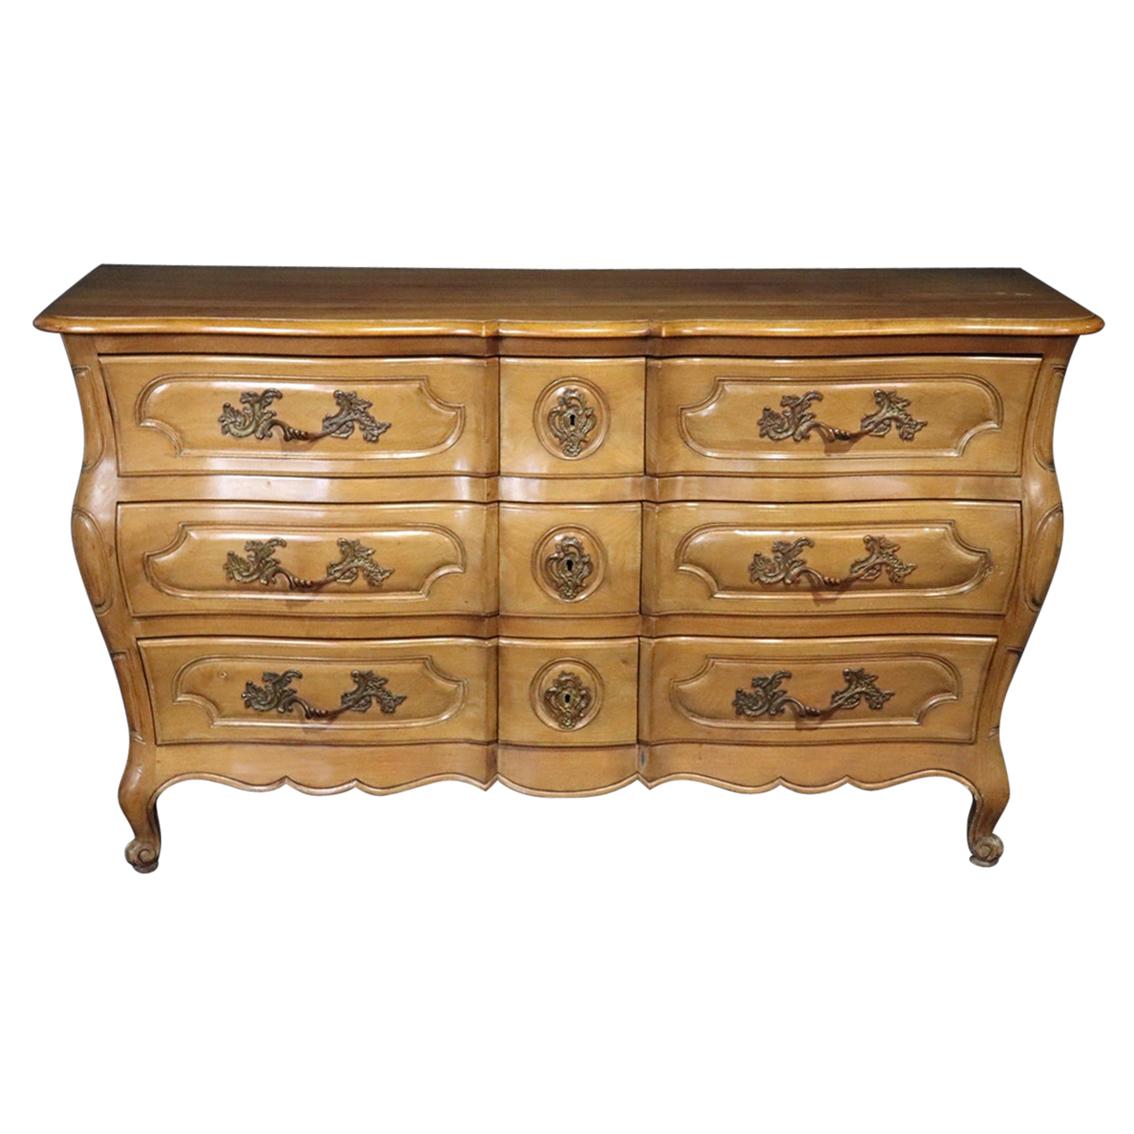 Auffray Style Carved French Louis XV Style Dresser Lined Drawers